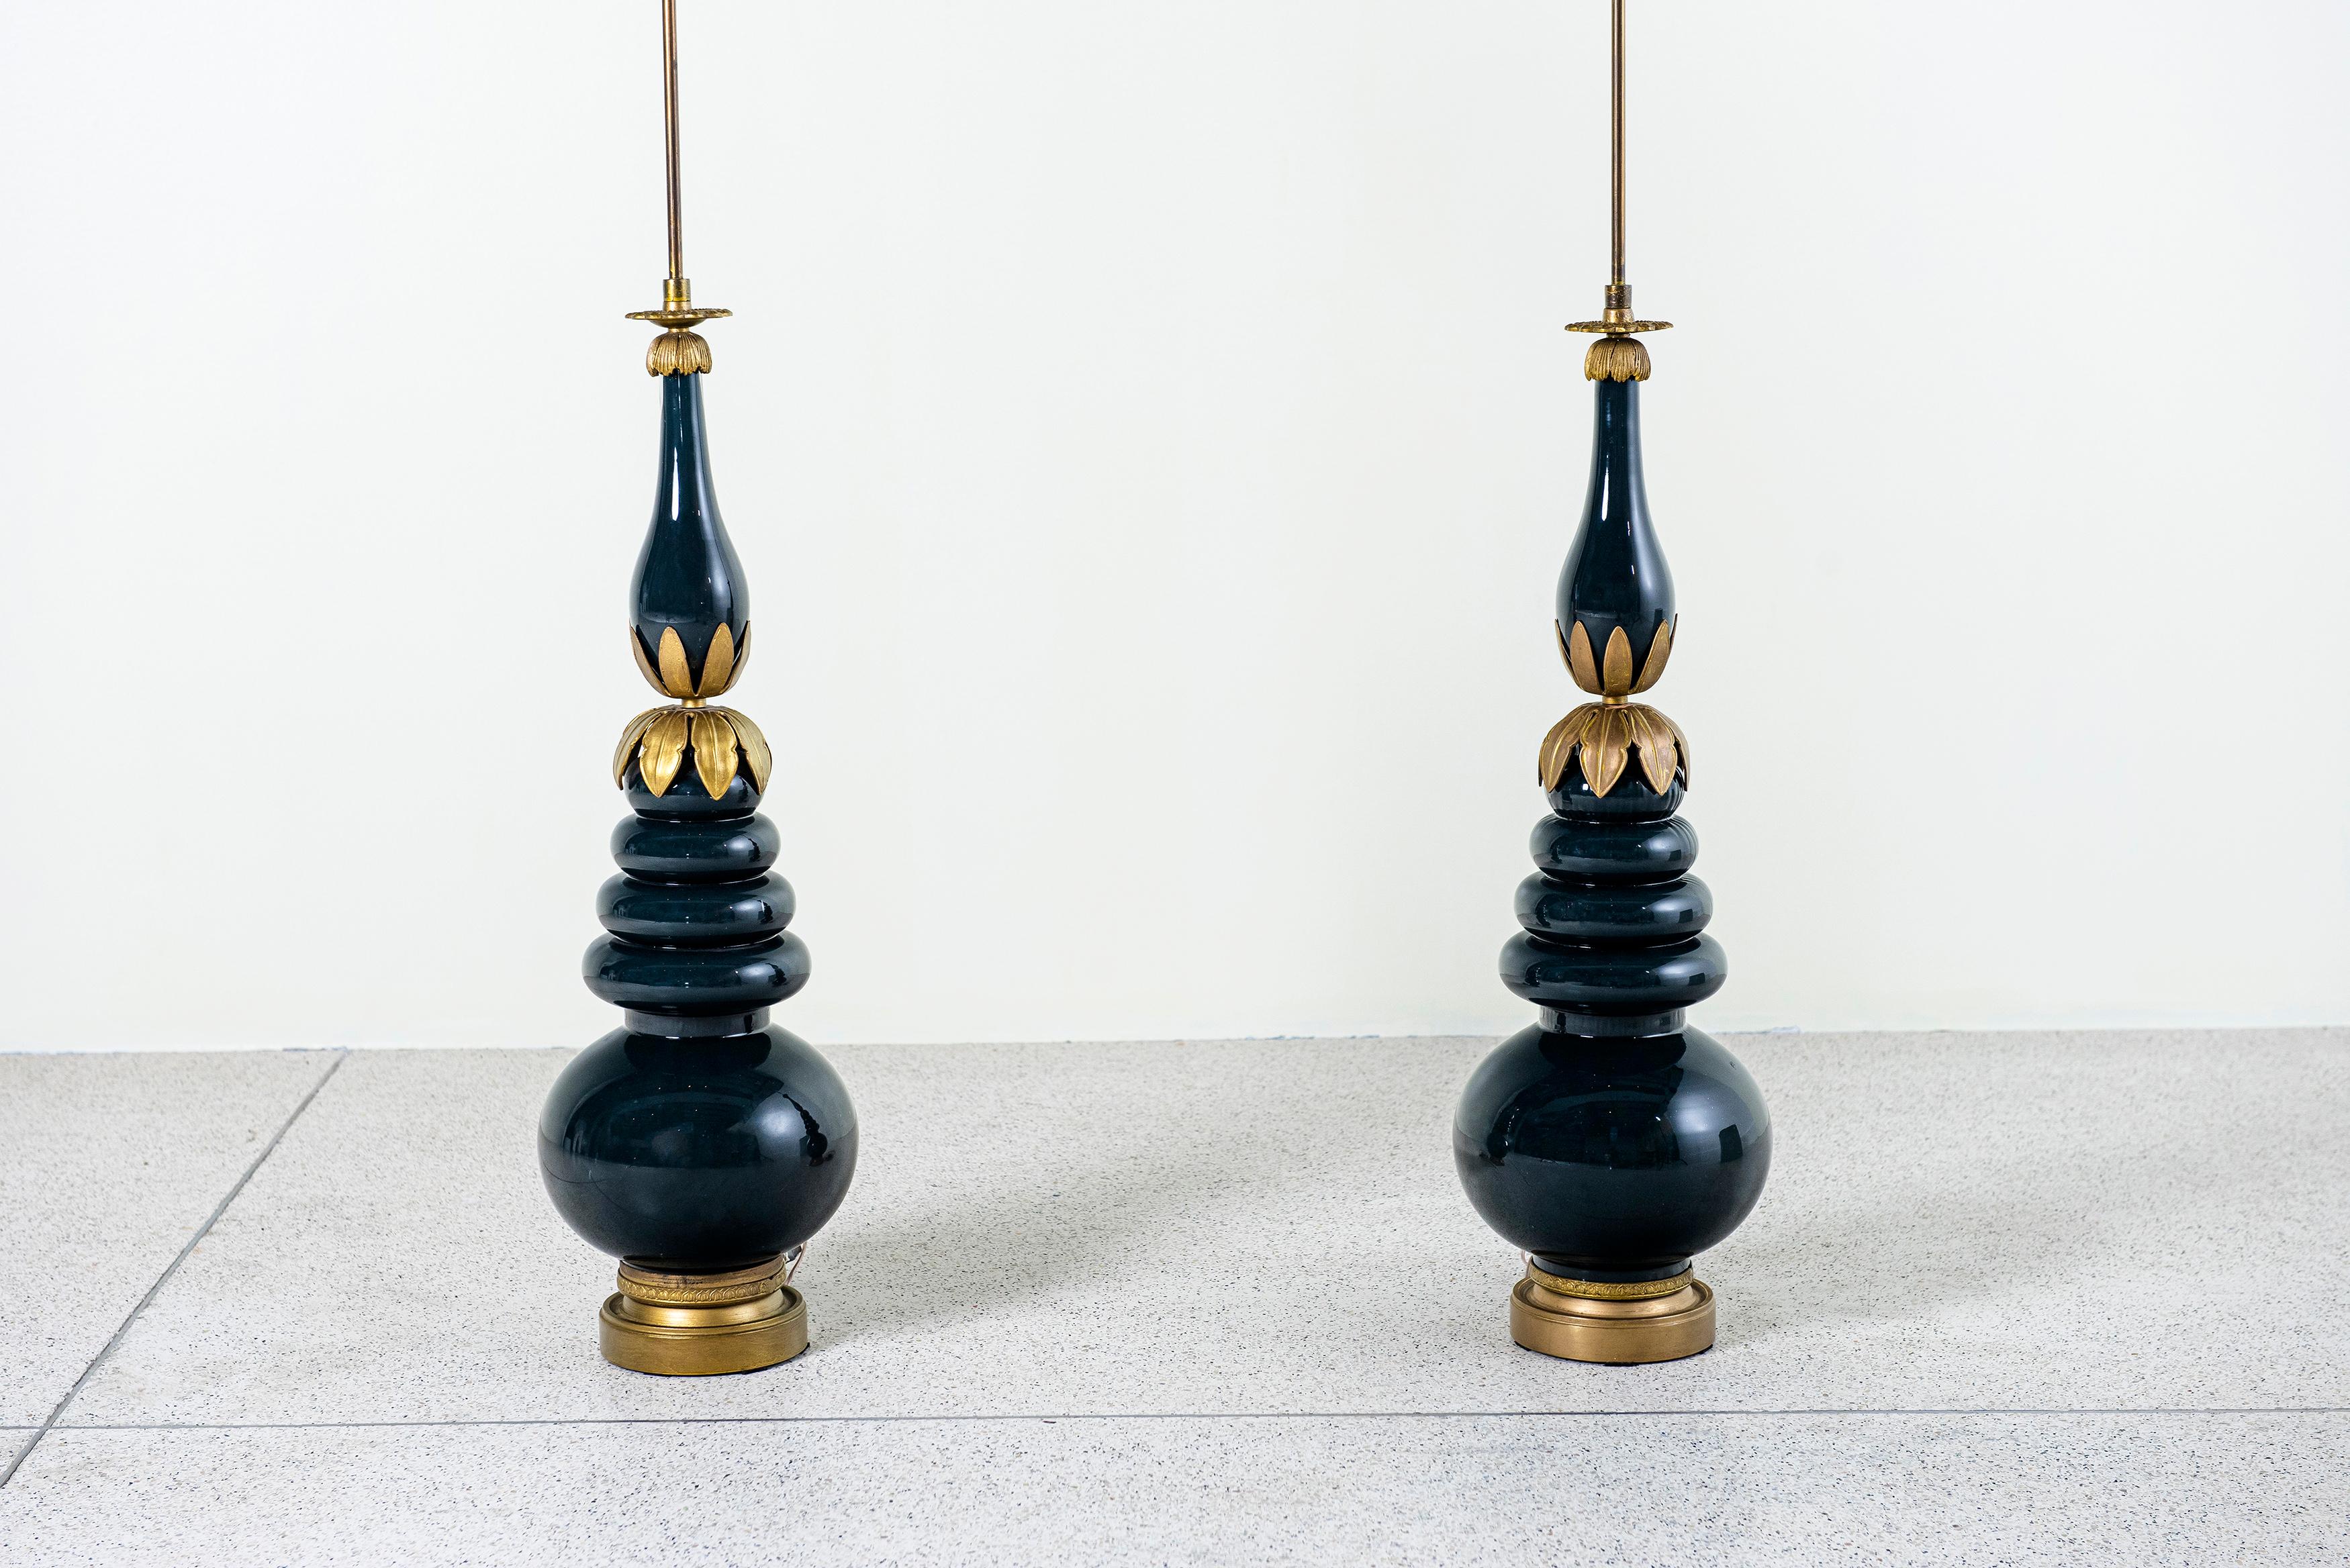 Pair of Bronze and Glass Table Lamps Attributed to Maison Jansen, France, circa 1940-1950.
         